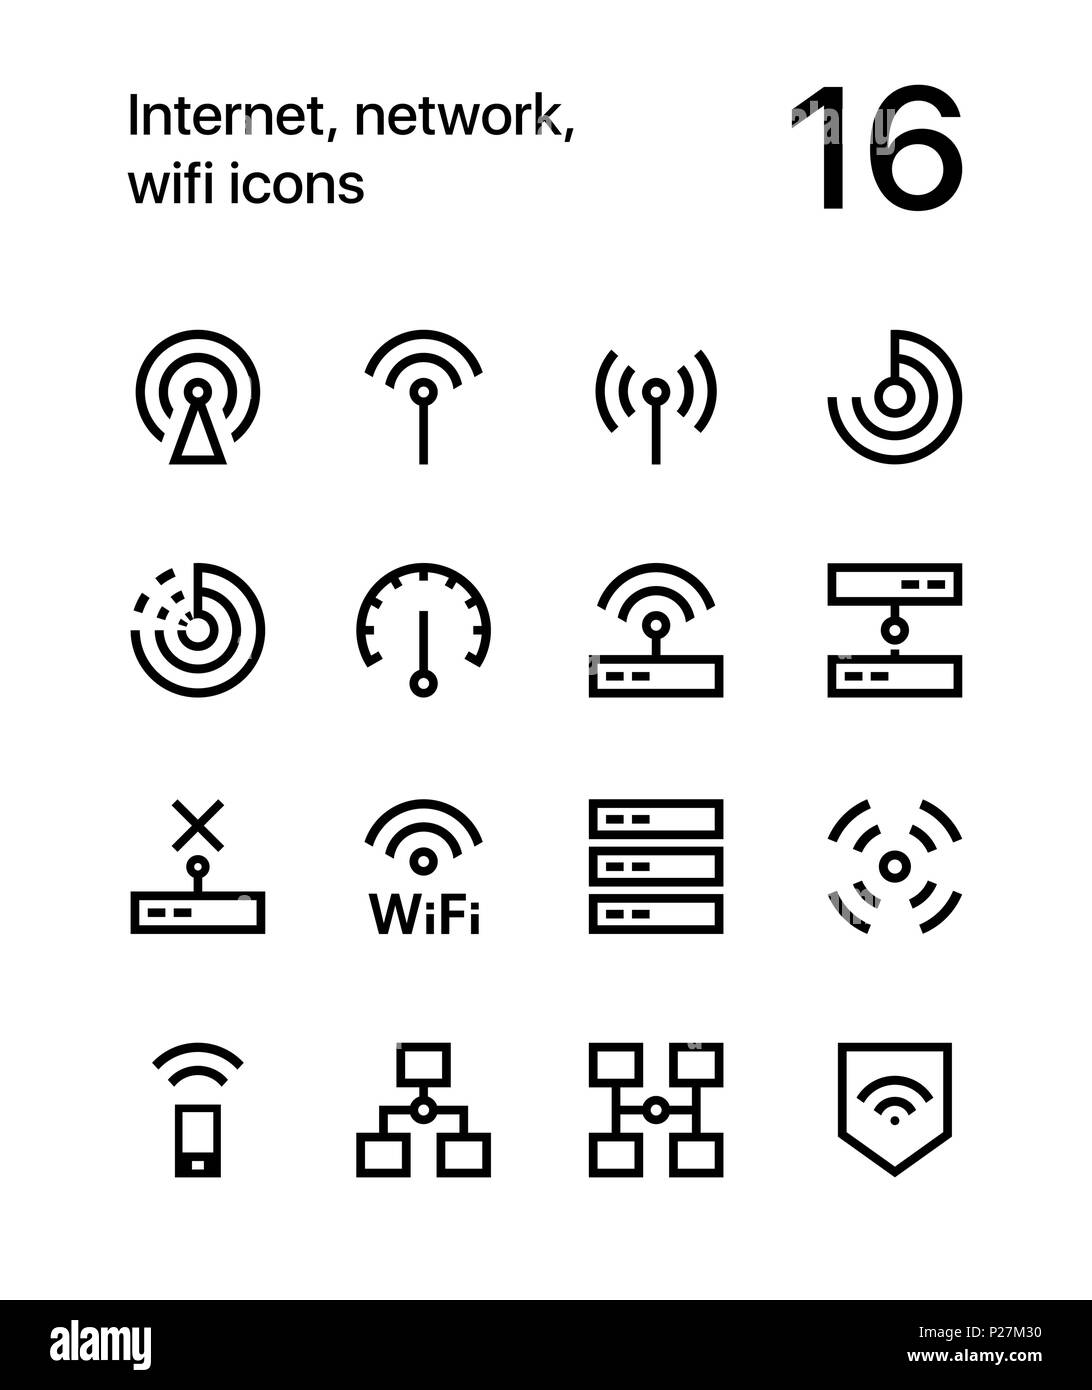 Internet, network, wifi icons for web and mobile design pack 1 Stock Vector